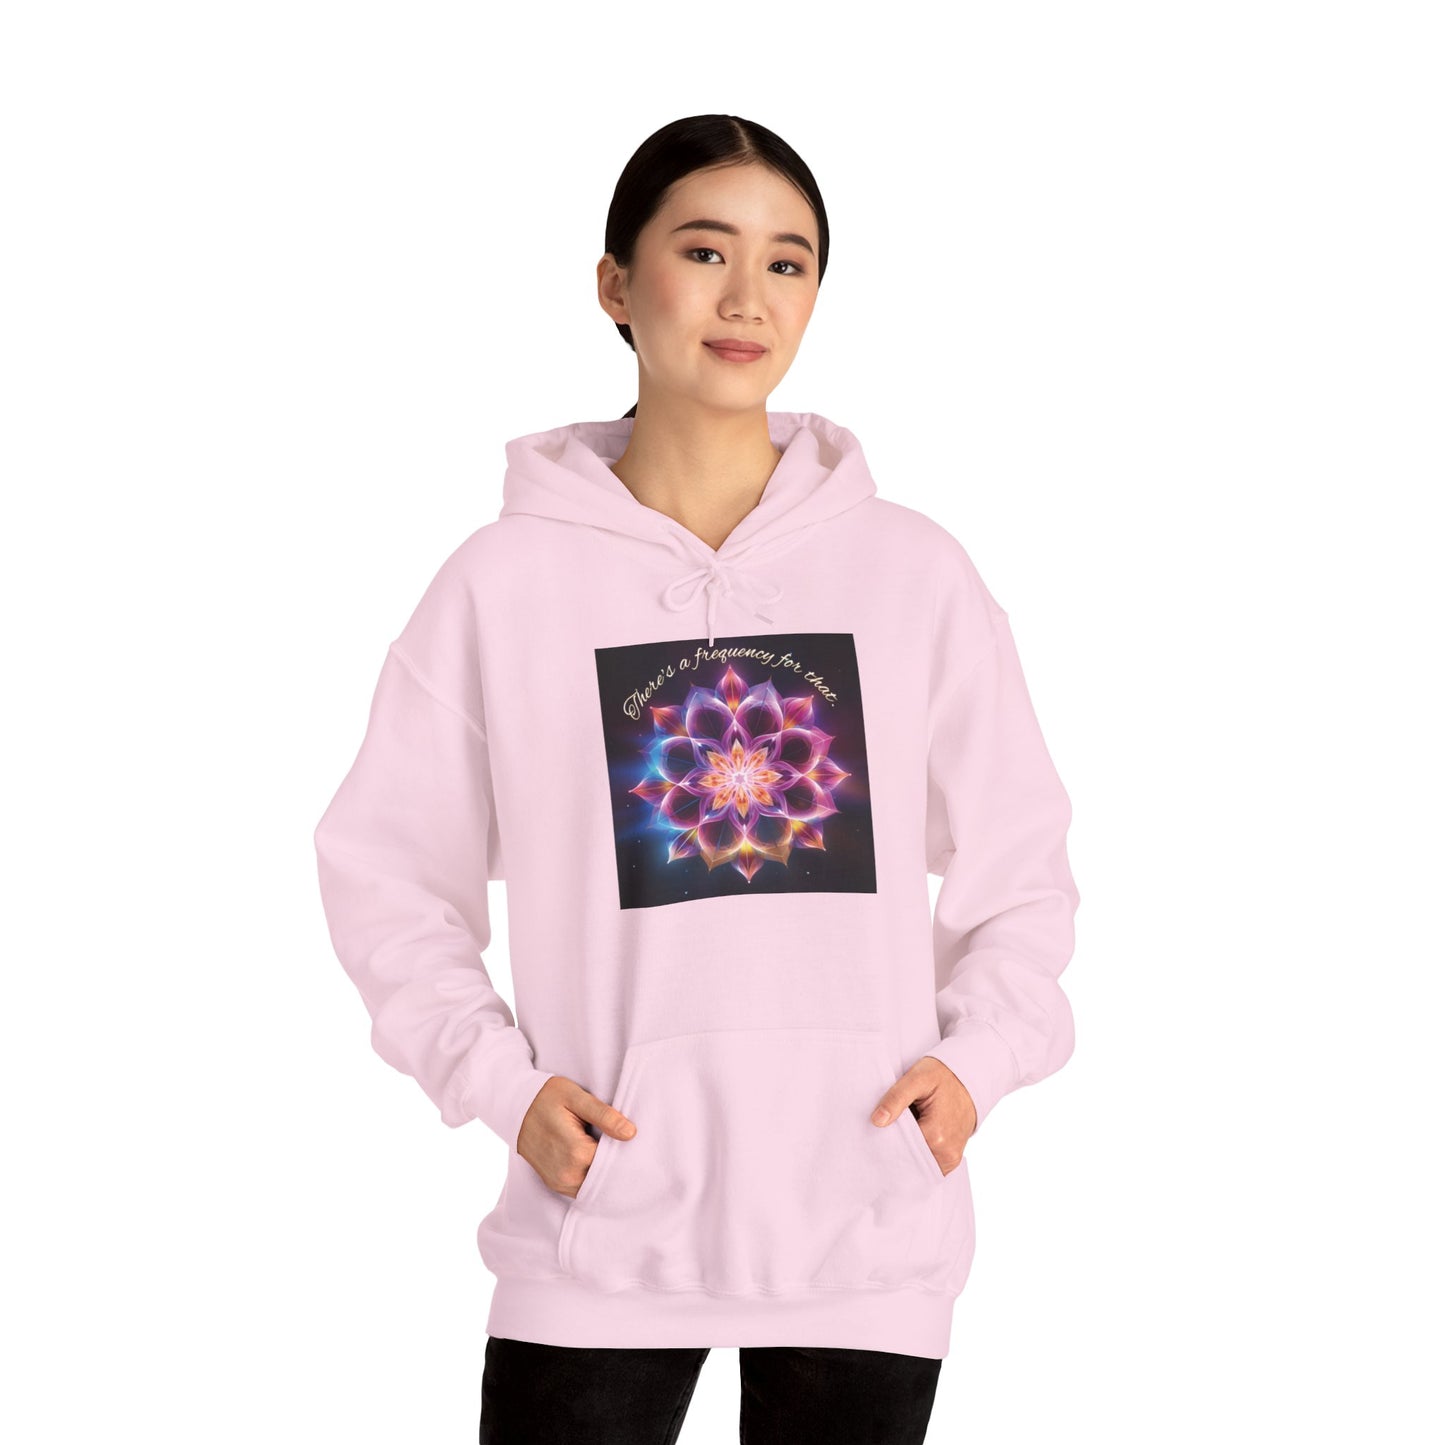 There's A Frequency For That (Full Image) Unisex Heavy Blend™ Hooded Sweatshirt